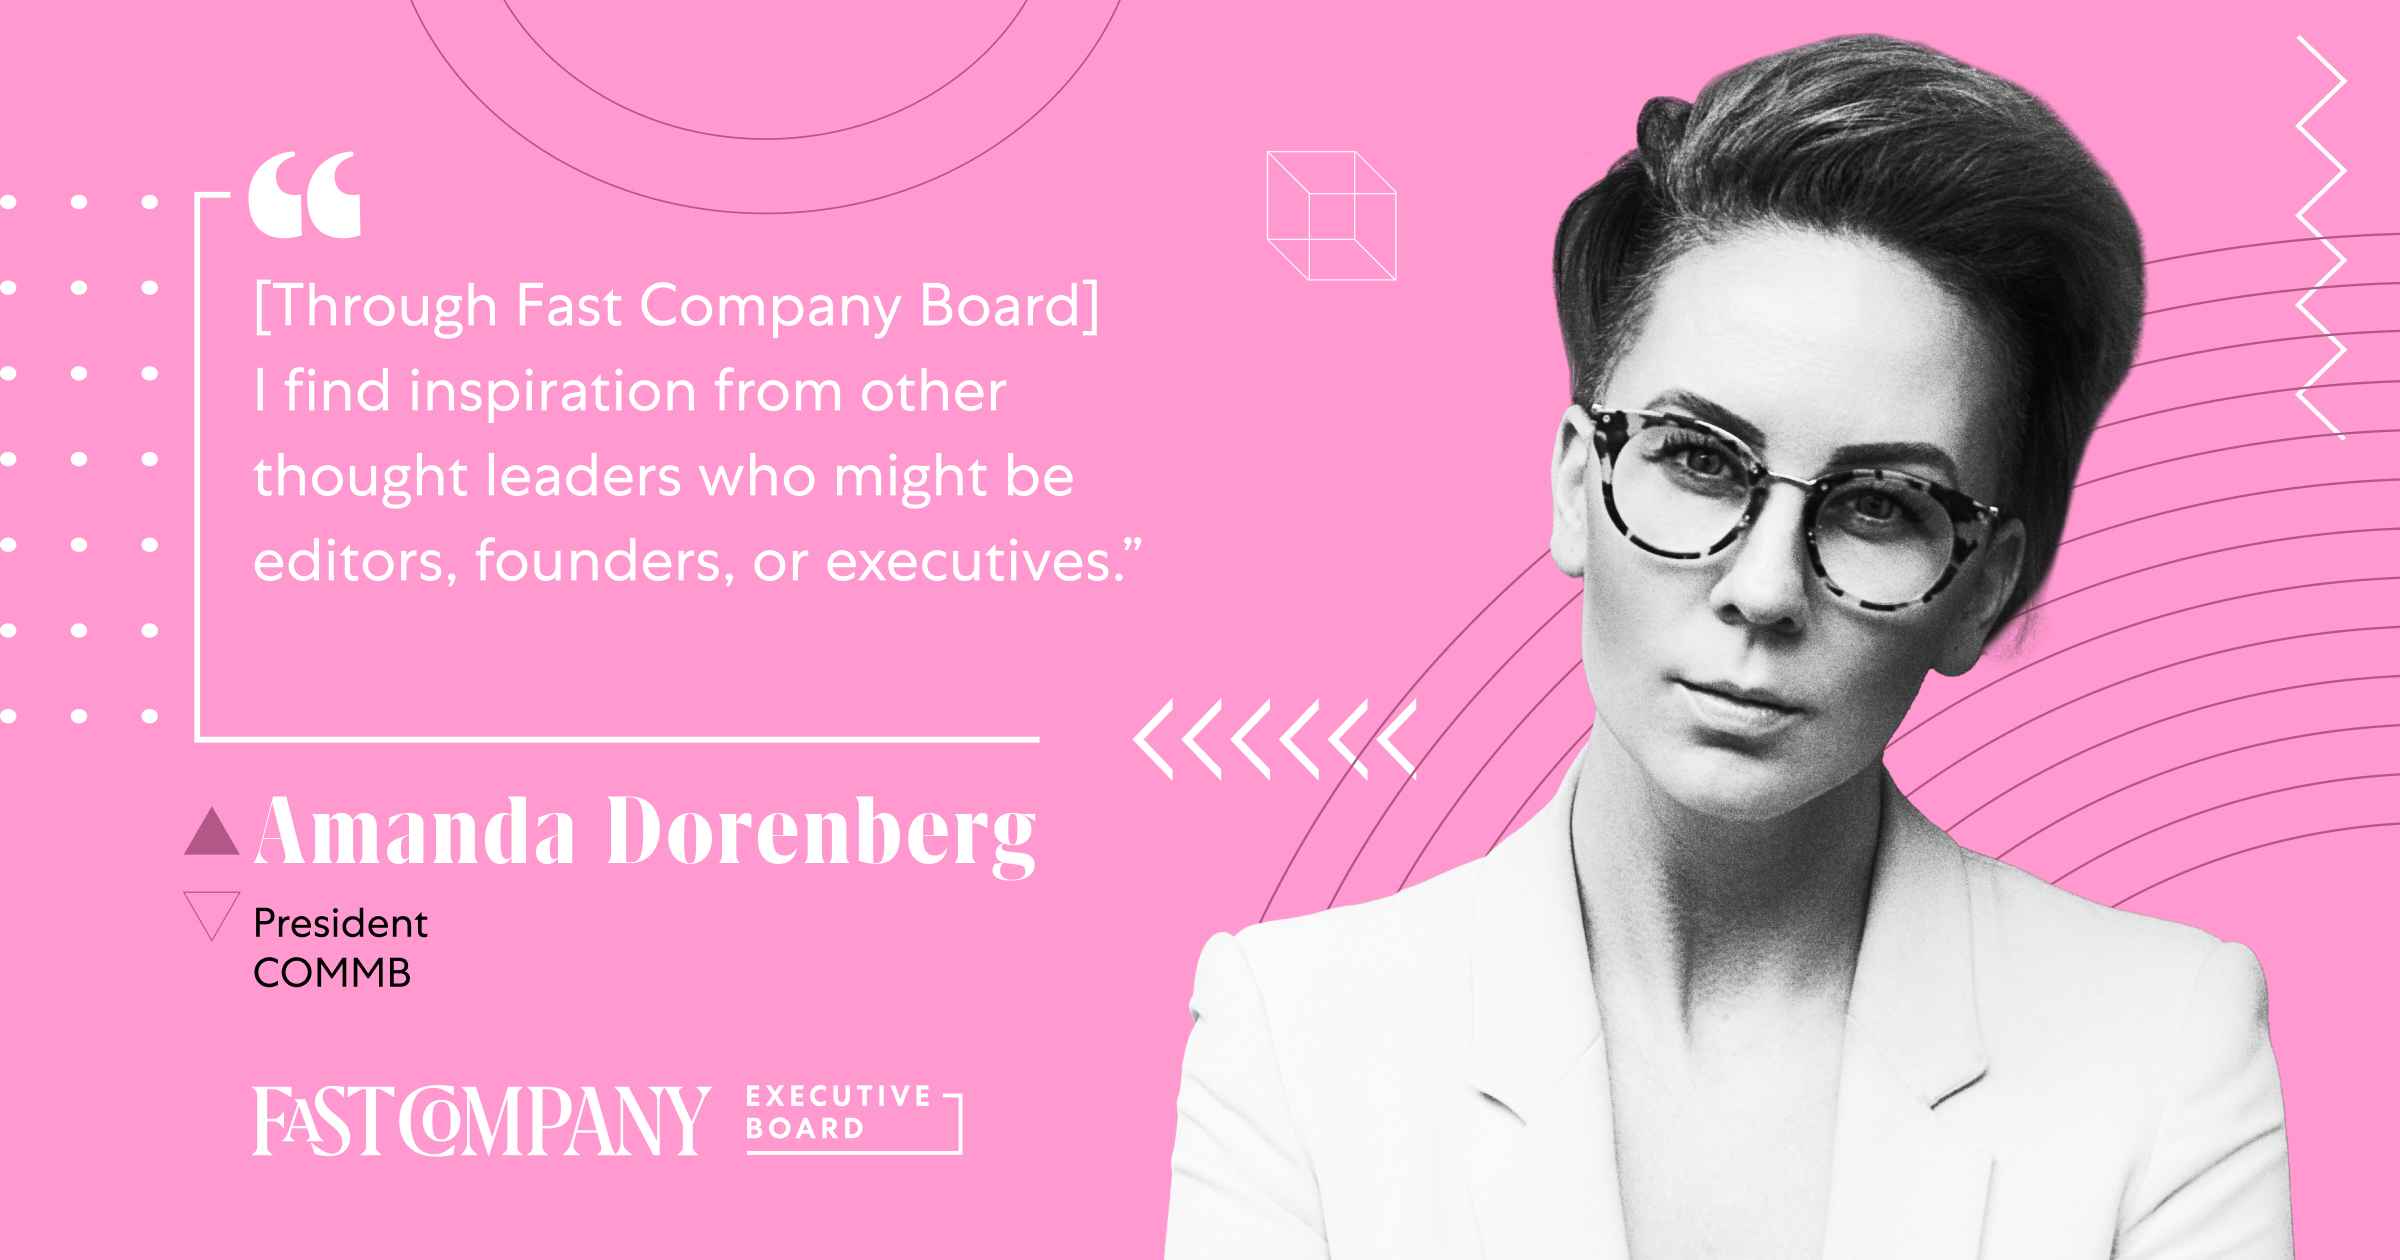 Fast Company Executive Board Gives Amanda Dorenberg a Broader Audience For Thought Leadership